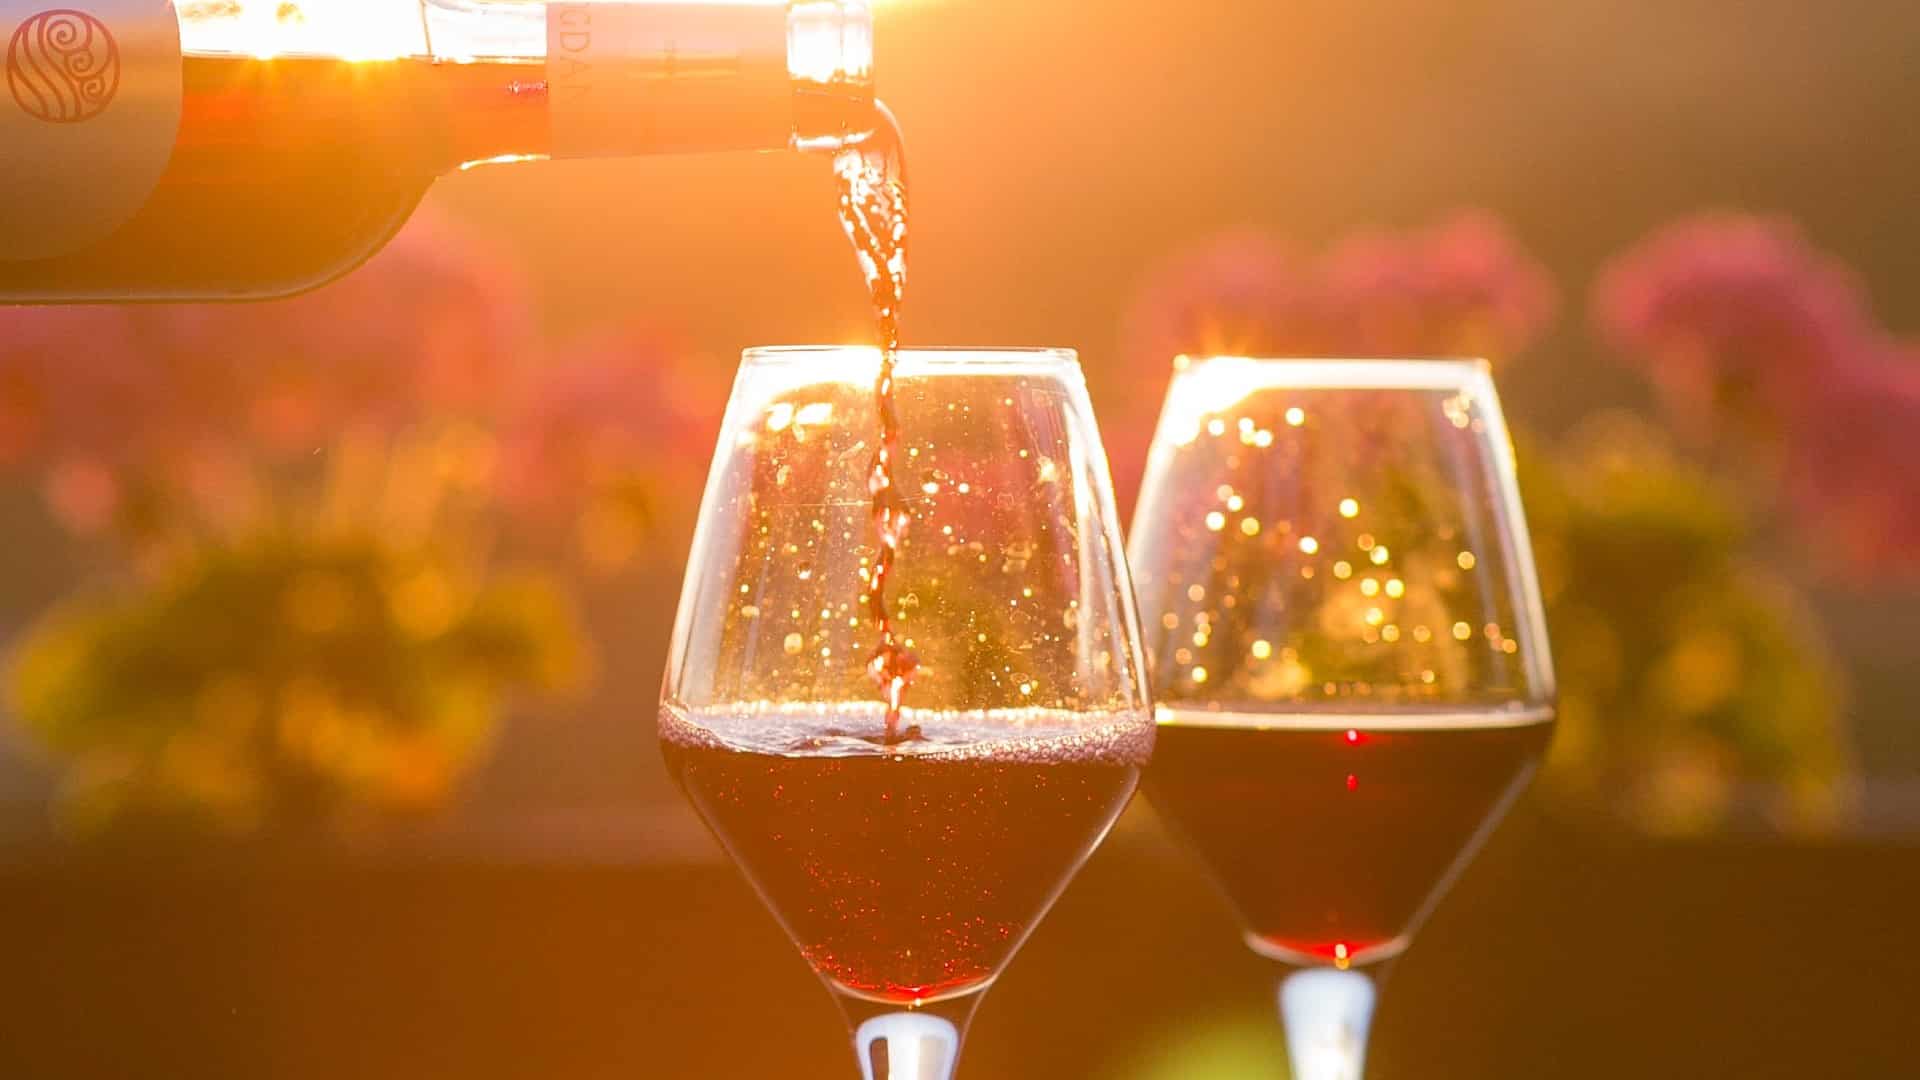 Red wine being poured into two wine glasses with flowers and golden sunshine in the background